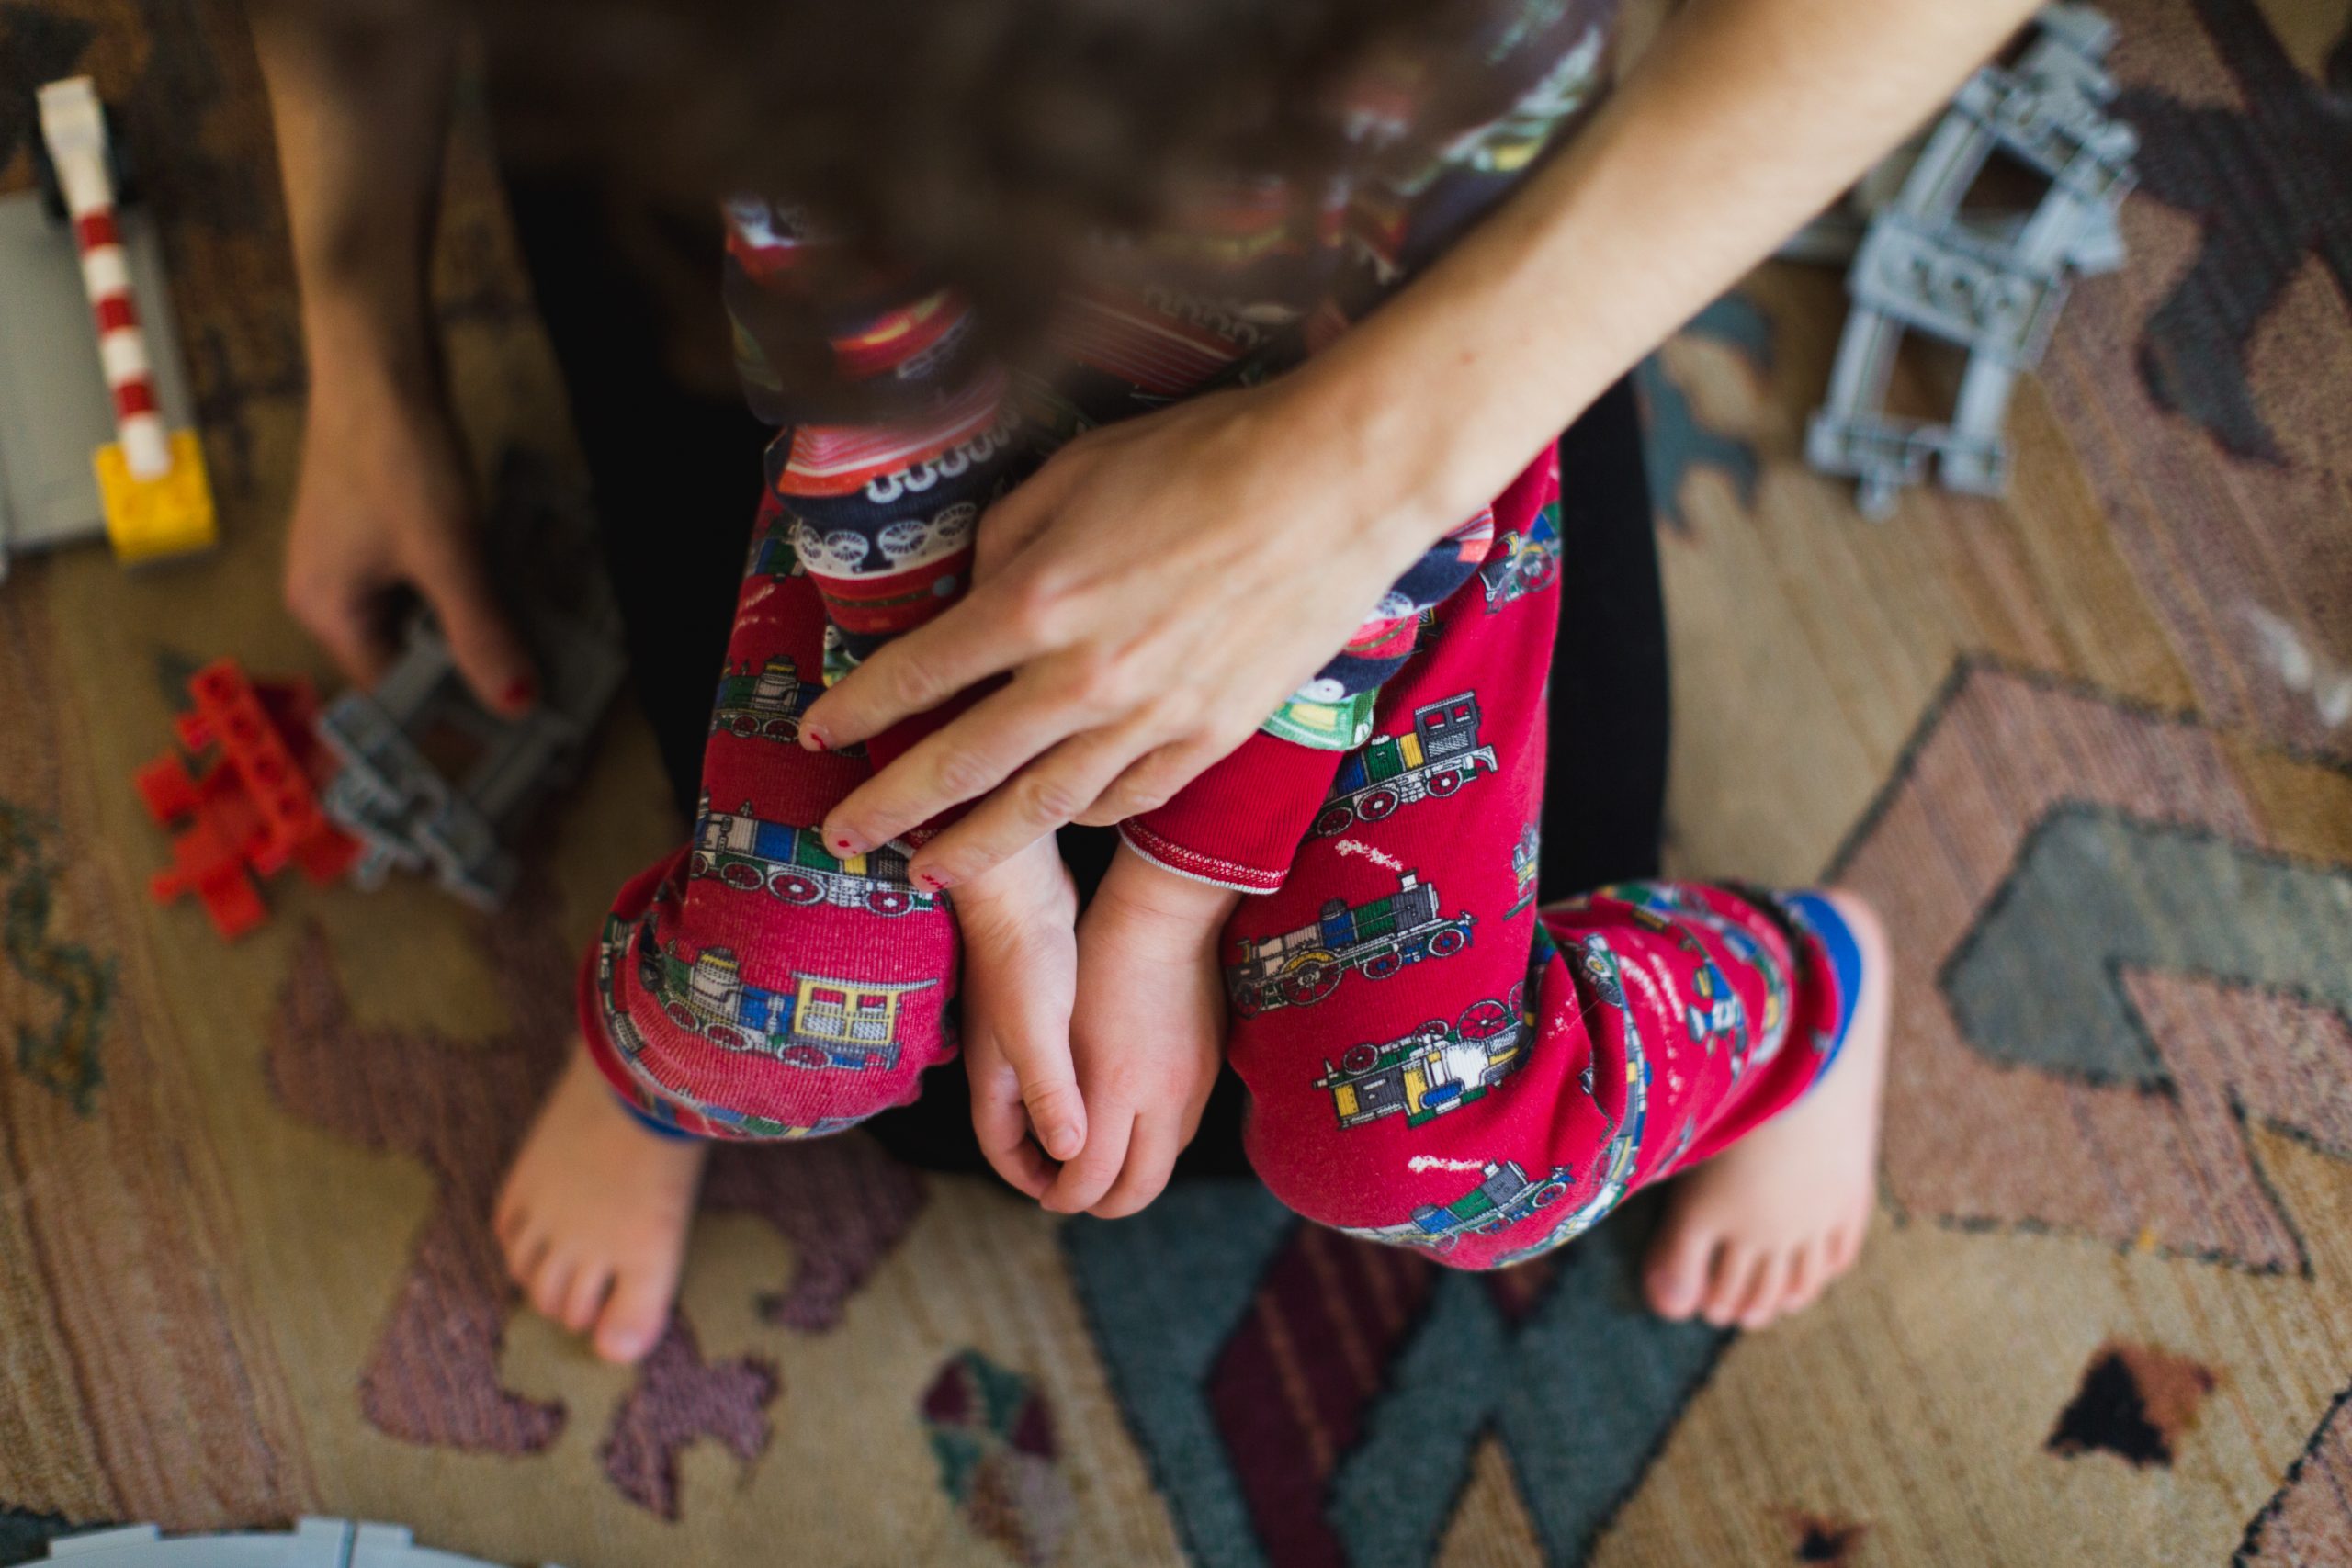 mom puts hand on top of son's legs